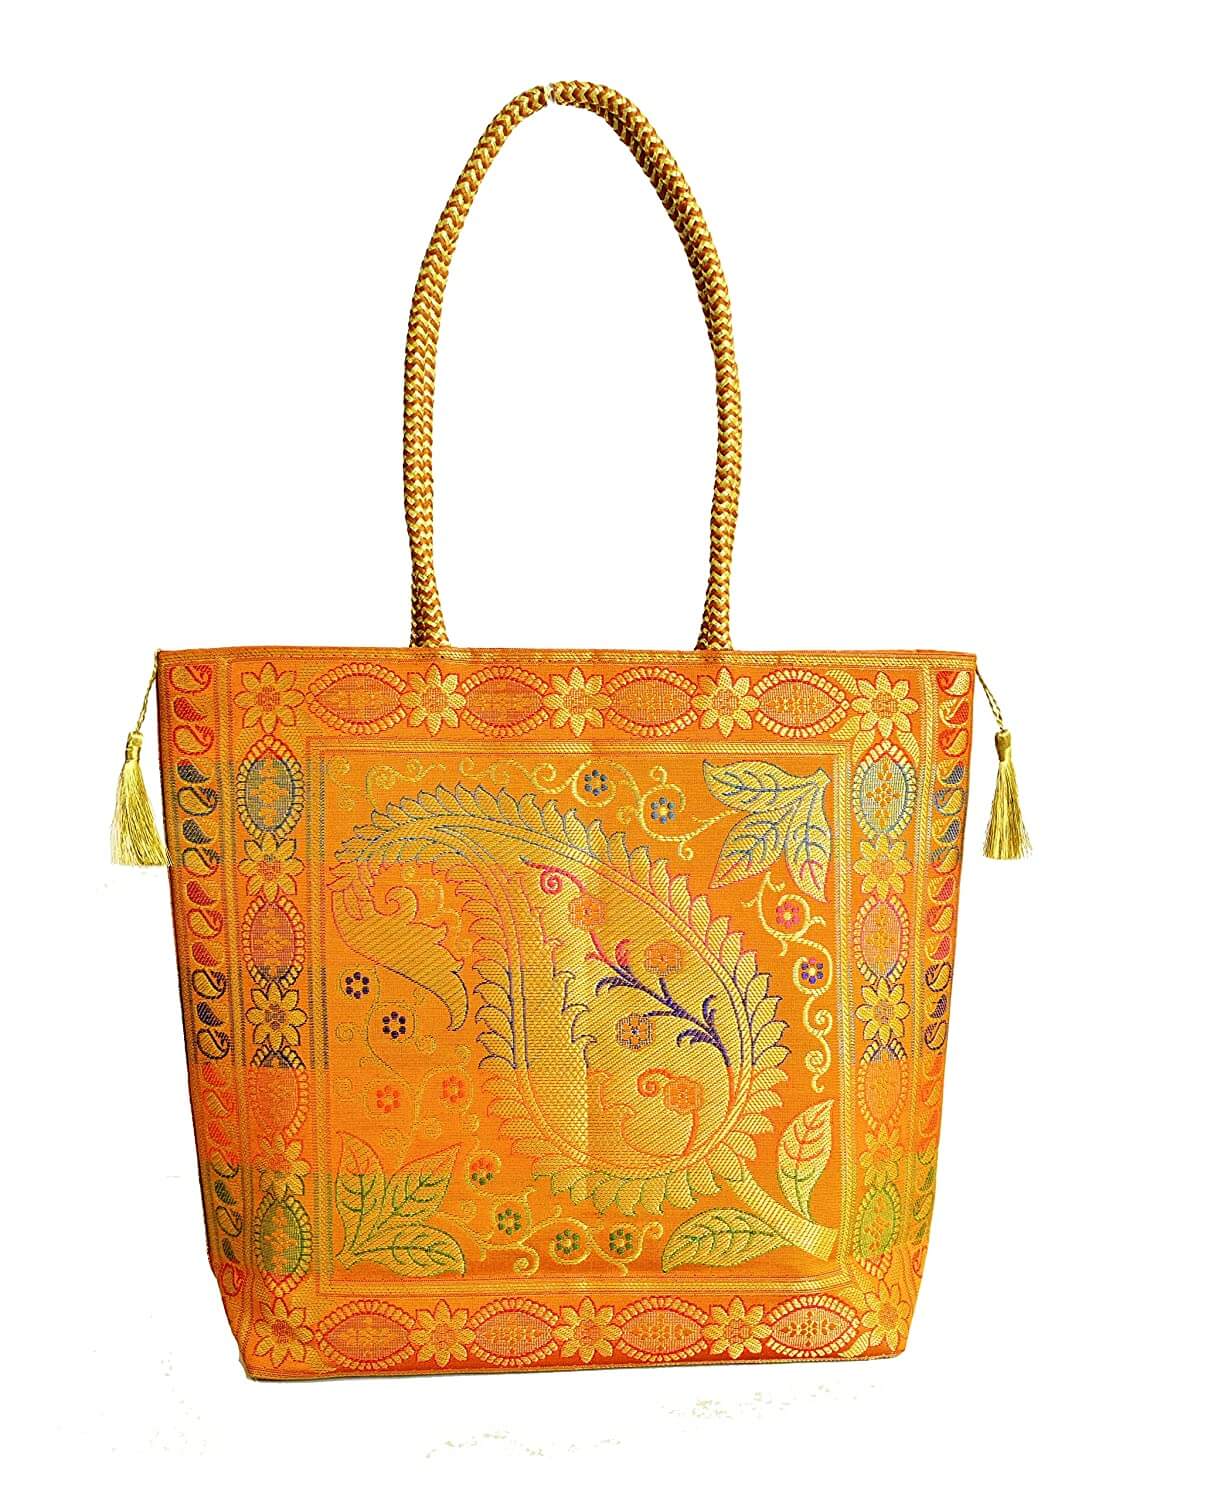 Embroidery Silk Handicraft Hand Bag, Shoulder, Tote Bag For Ladies (13 x 11.5 x 7.5 Inches, Leaves & Flower, Orange Color) Mangal Fashions | Indian Home Decor and Craft